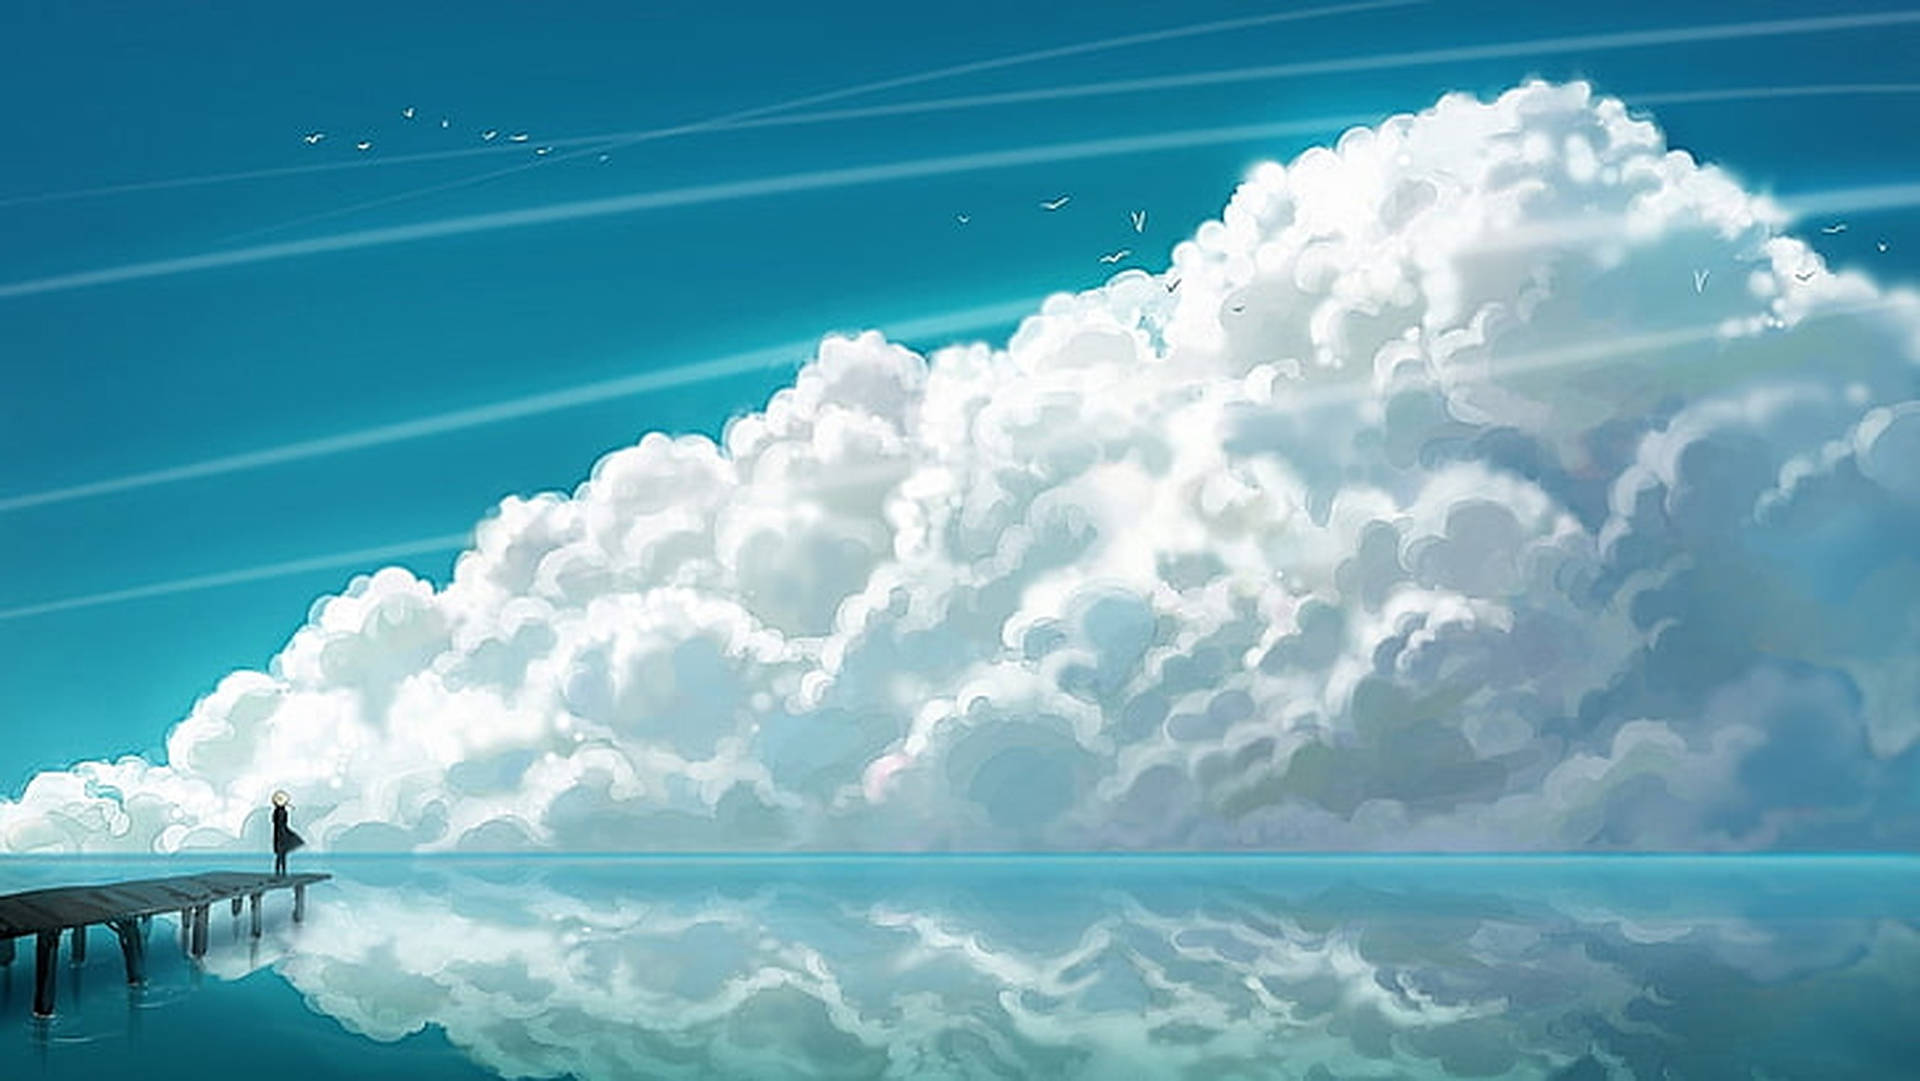 Cloudy Weather Digital Illustration Background